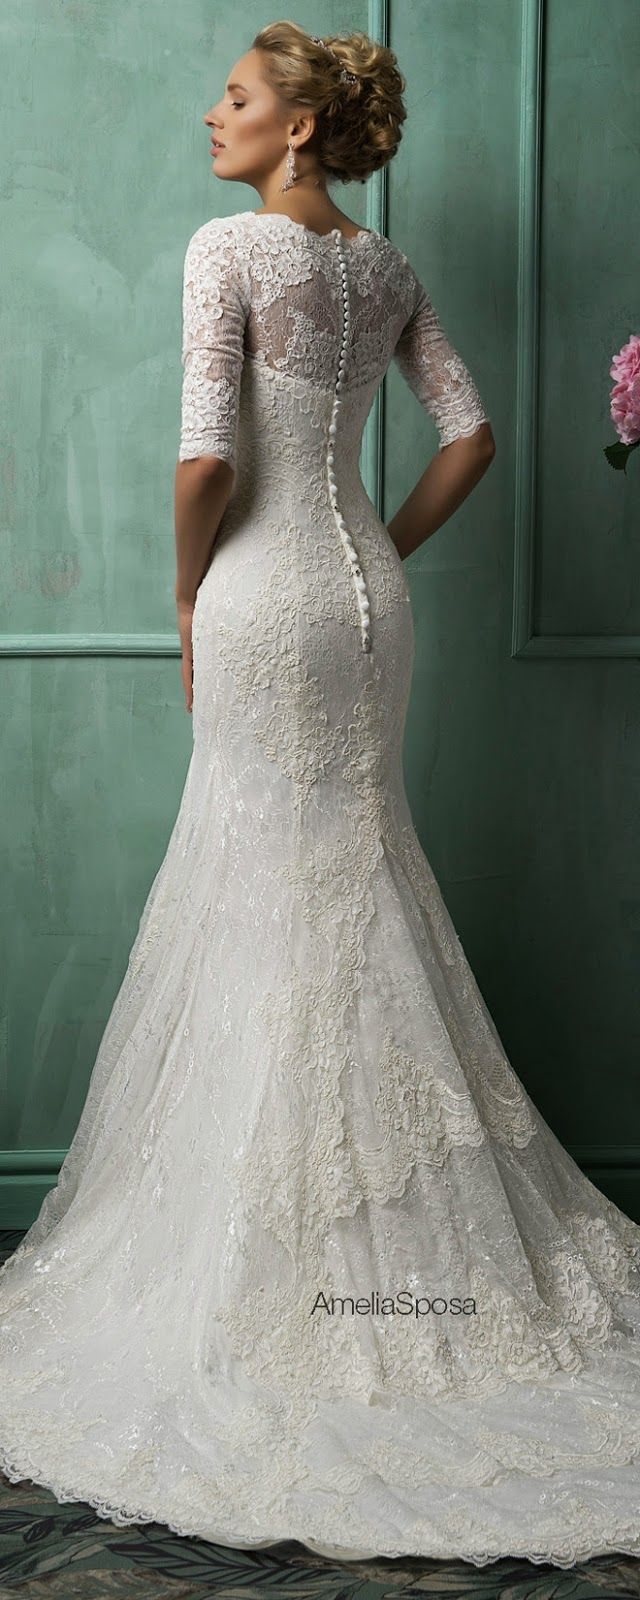 Wedding Gowns with Buttons Down the Back